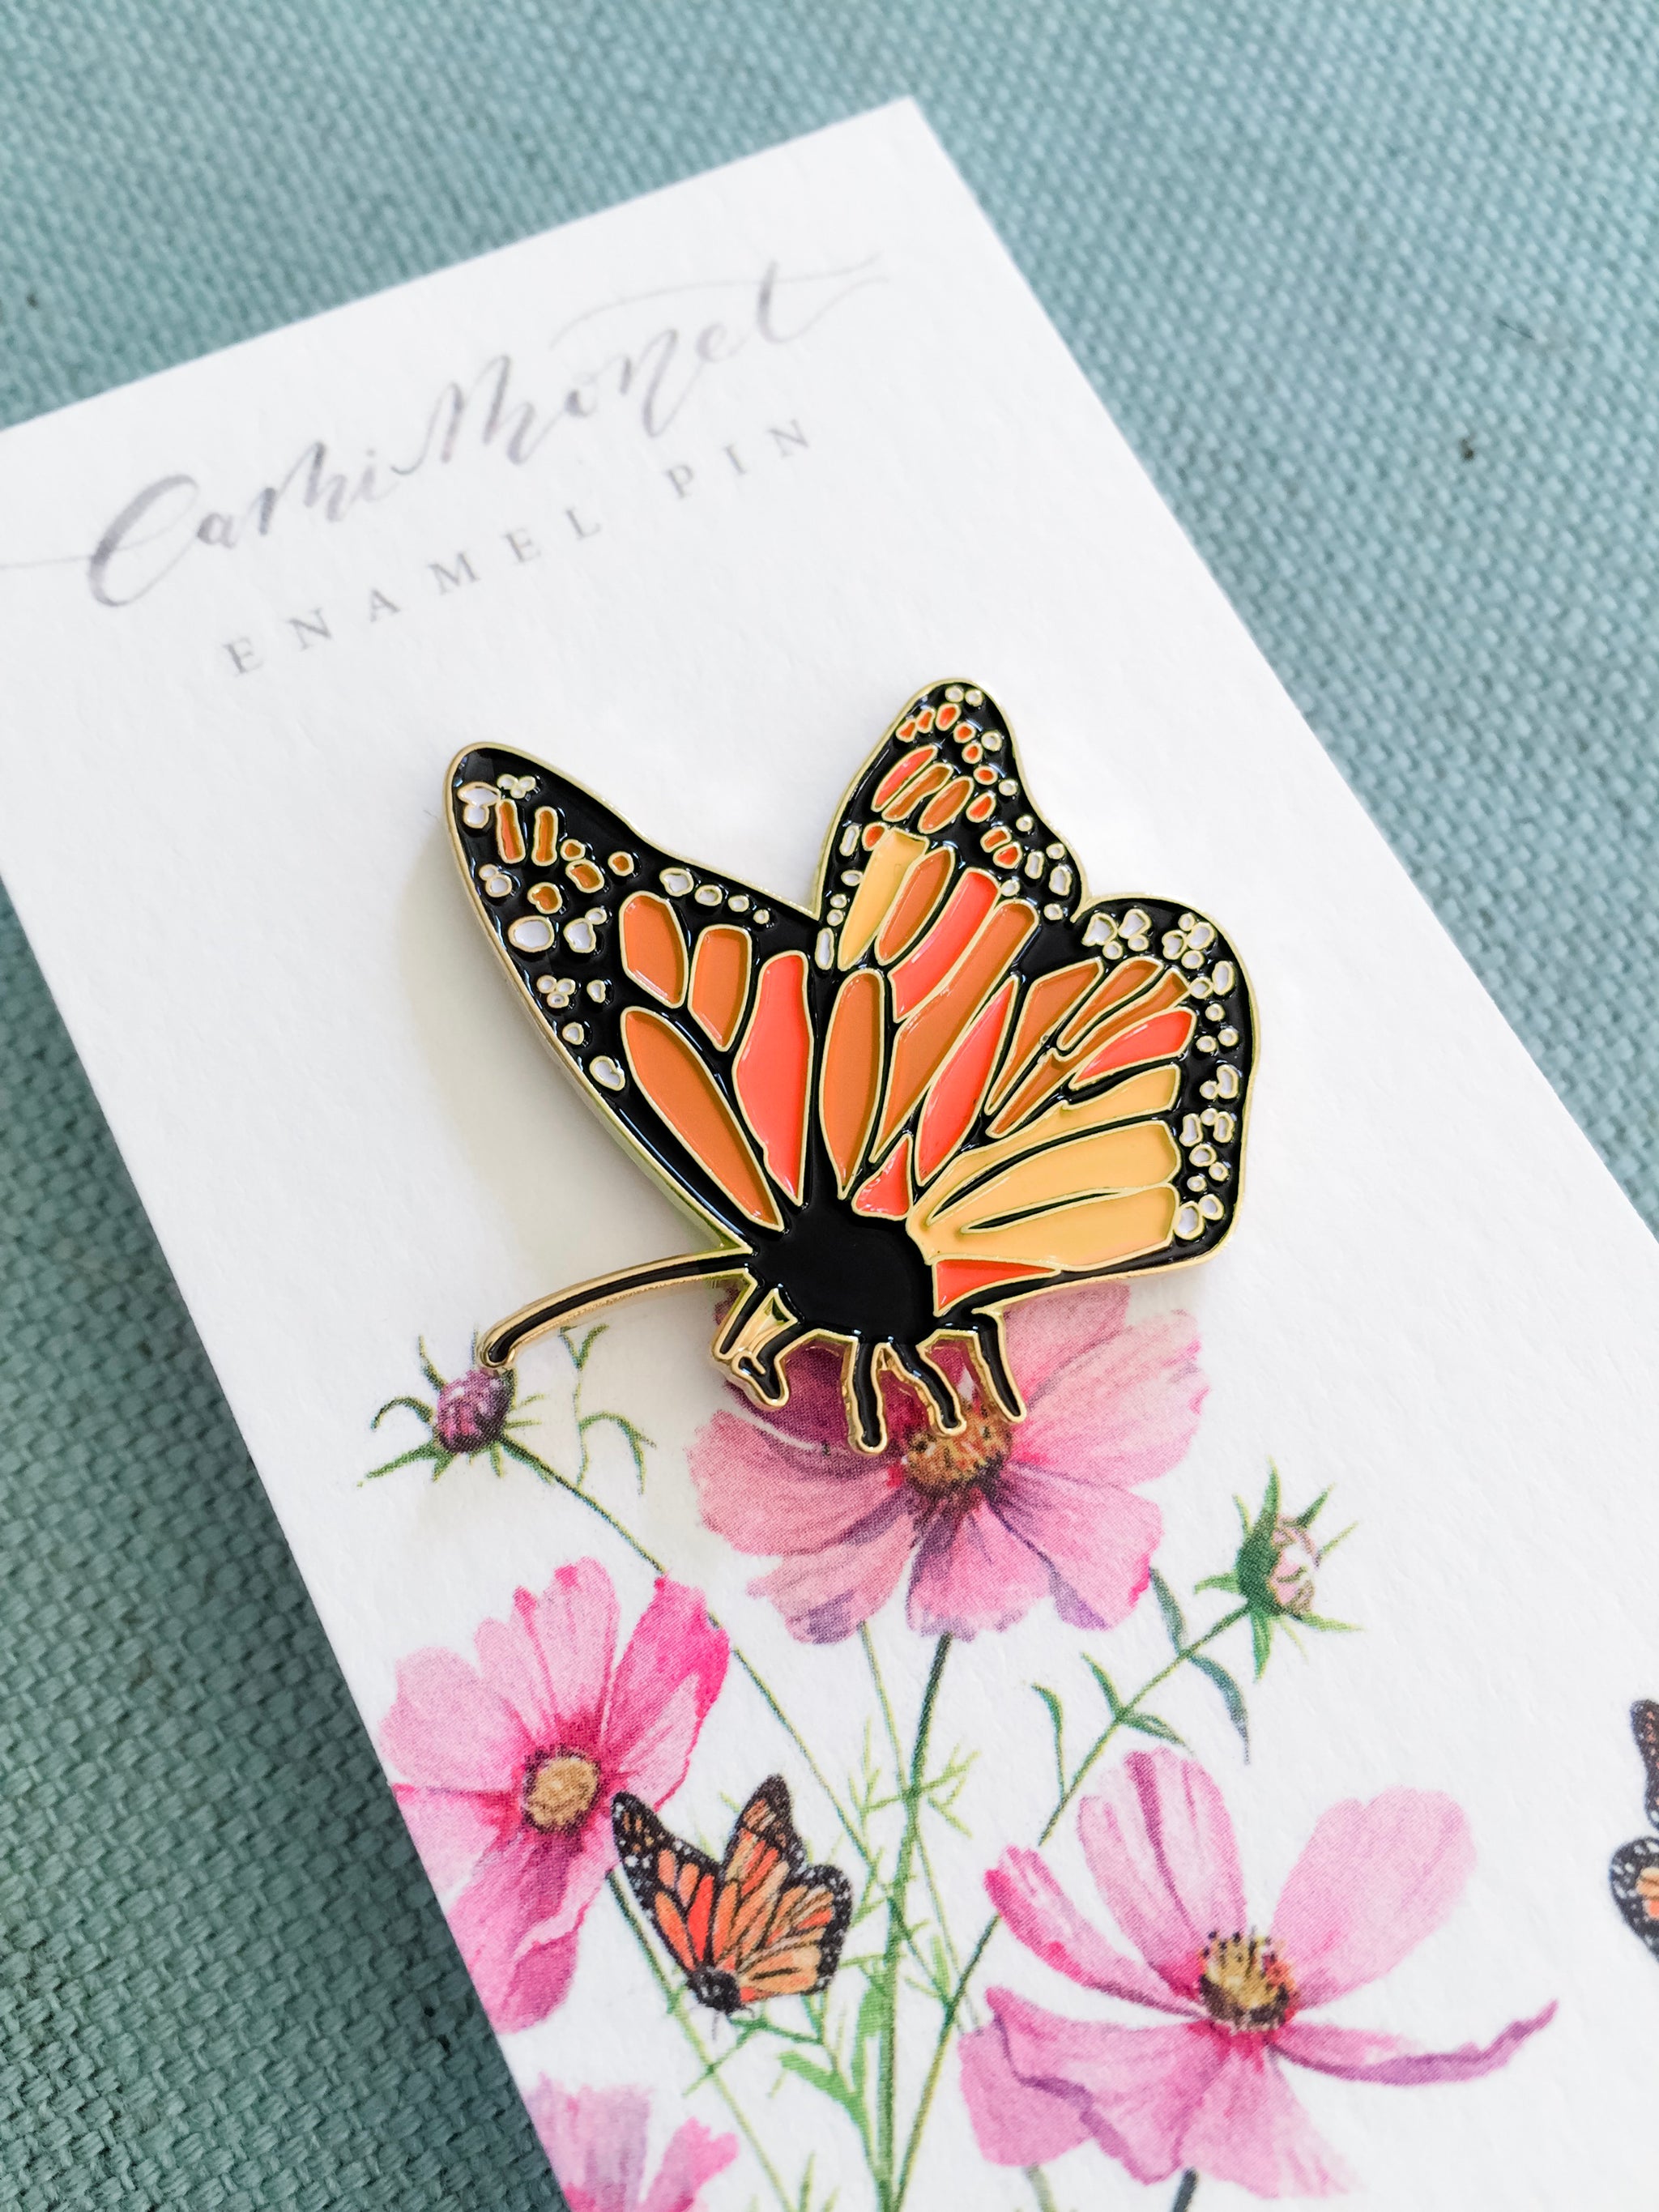 Monarch Butterfly Enamel Pin – Botanical Bright - Add a Little Beauty to  Your Everyday